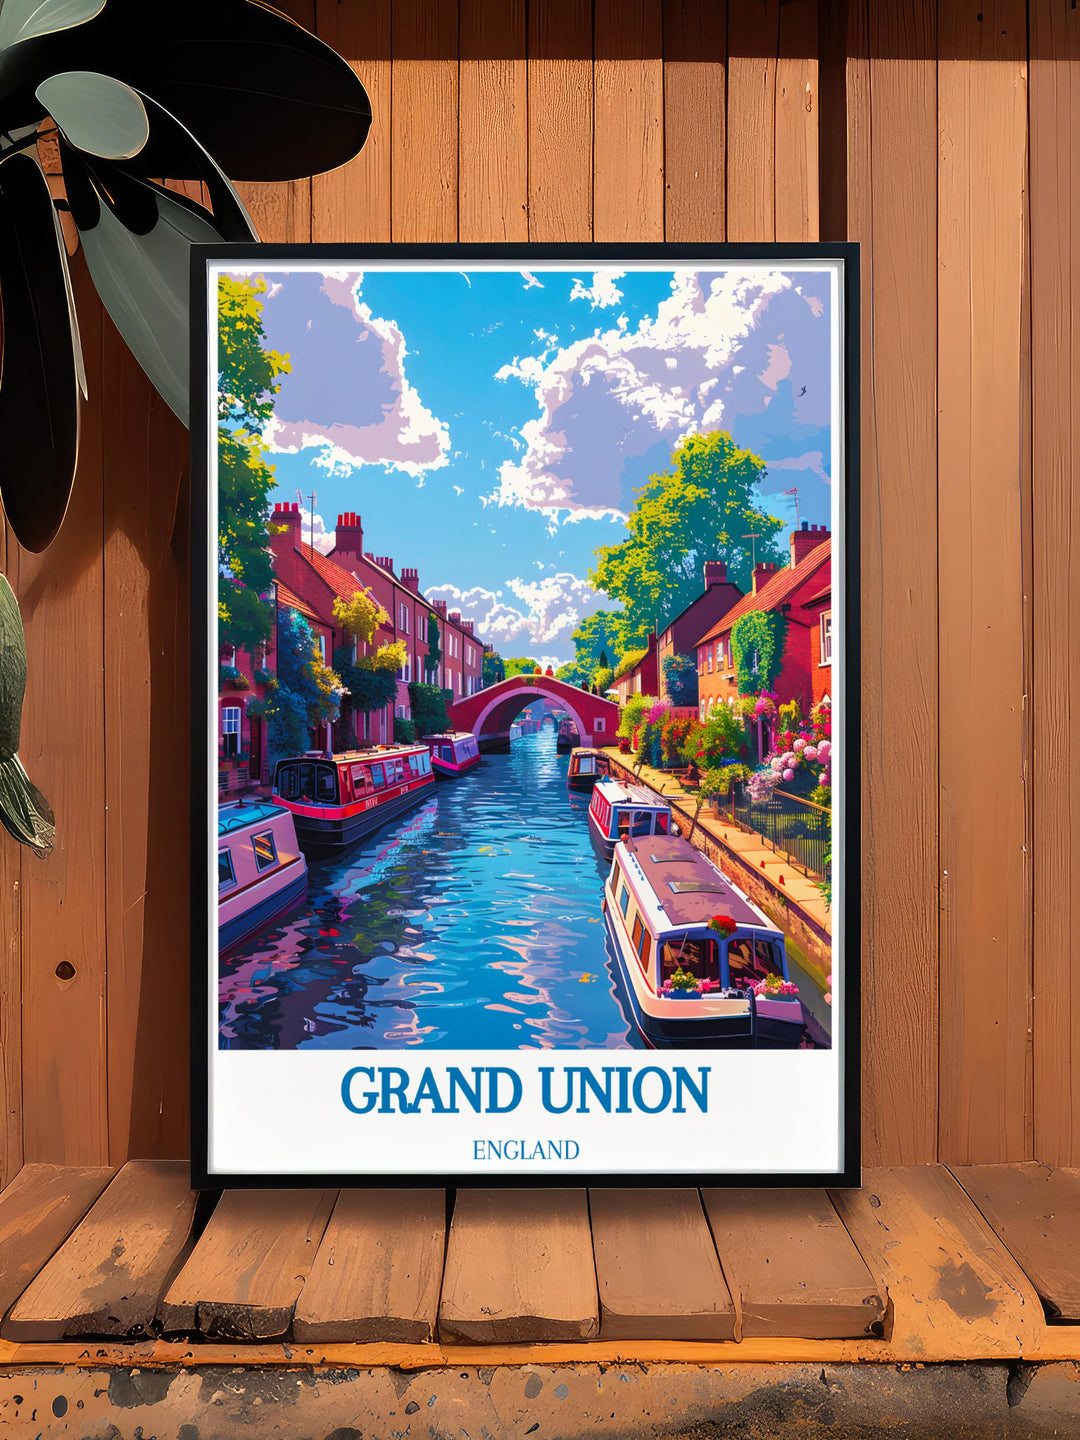 Modern wall décor featuring Little Venice, London, with high quality print of the serene canal environment, suitable for any contemporary home.